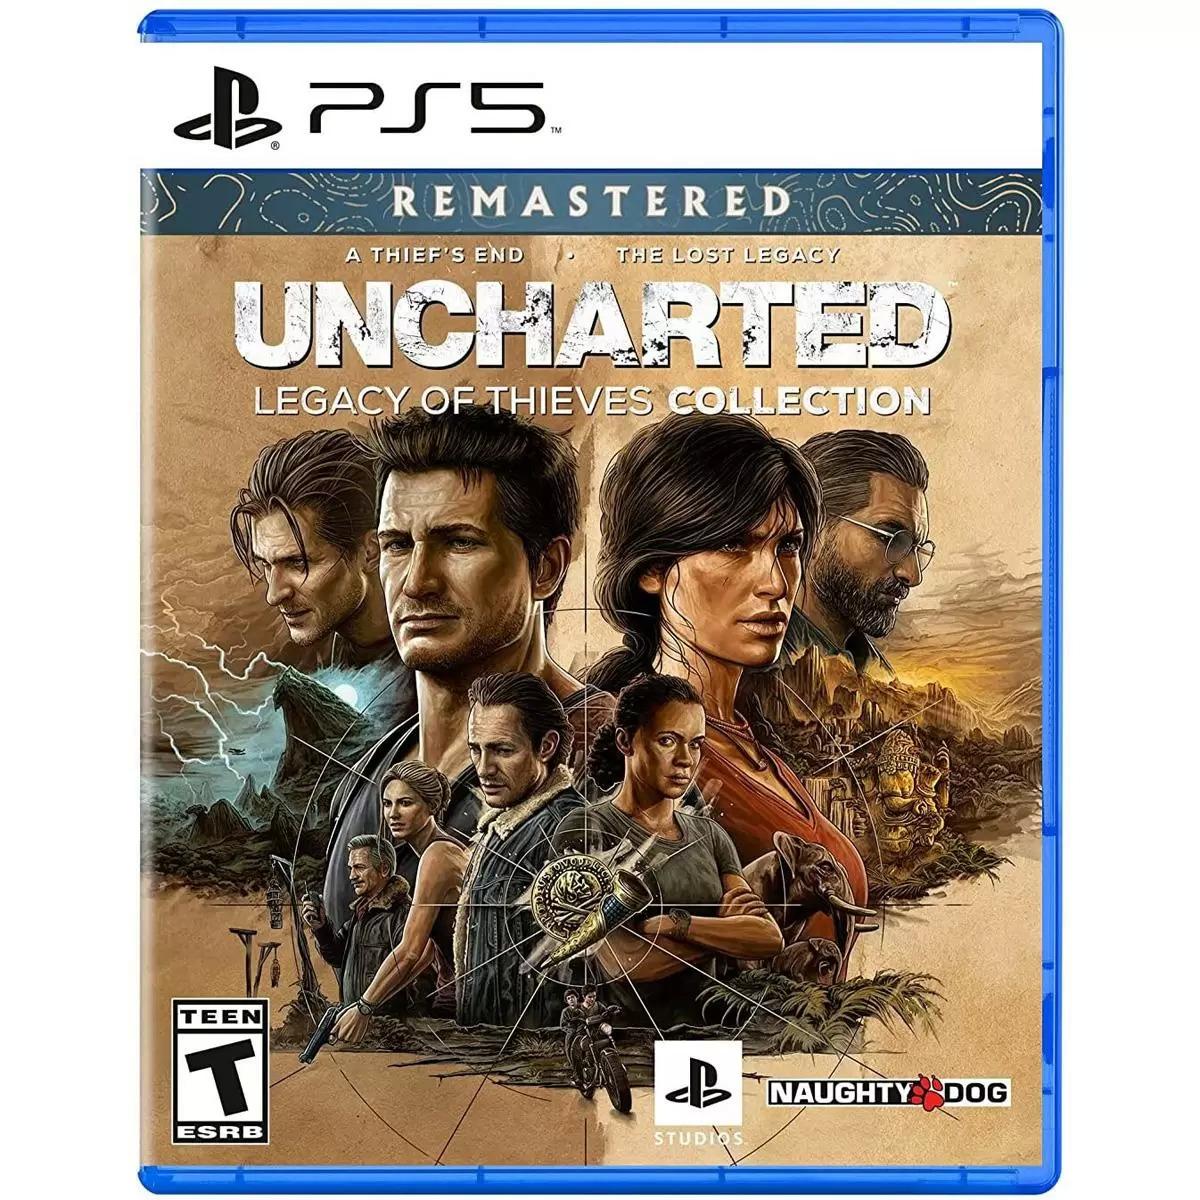 Uncharted Legacy of Thieves Collection PS5 for $19